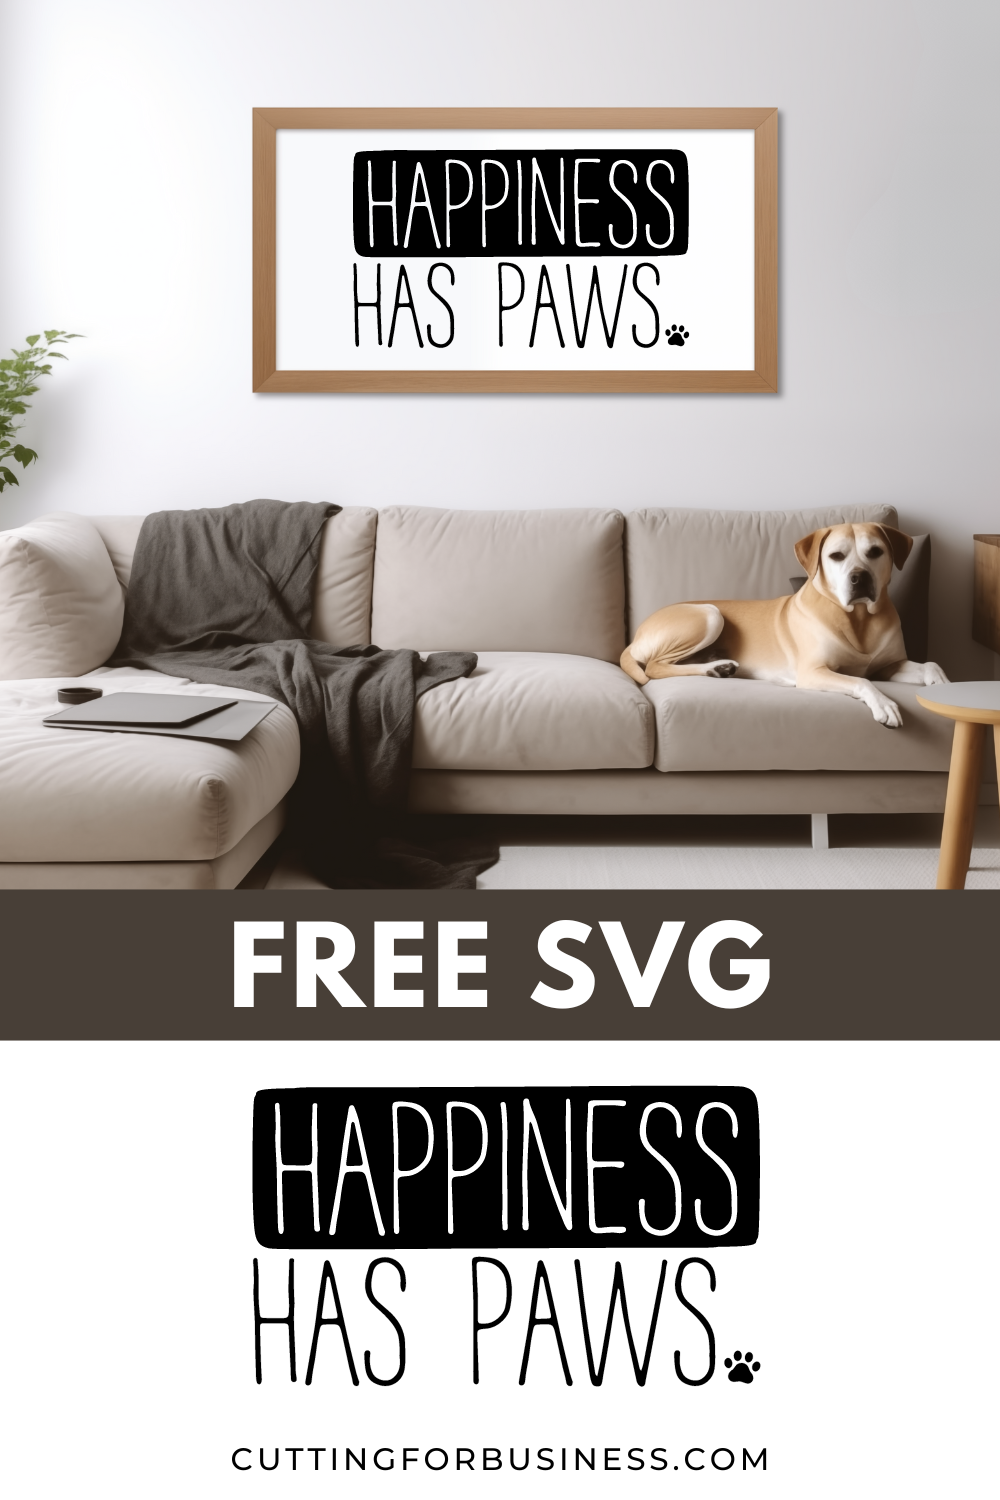 Free Pet SVG - Happiness Has Paws - cuttingforbusiness.com.